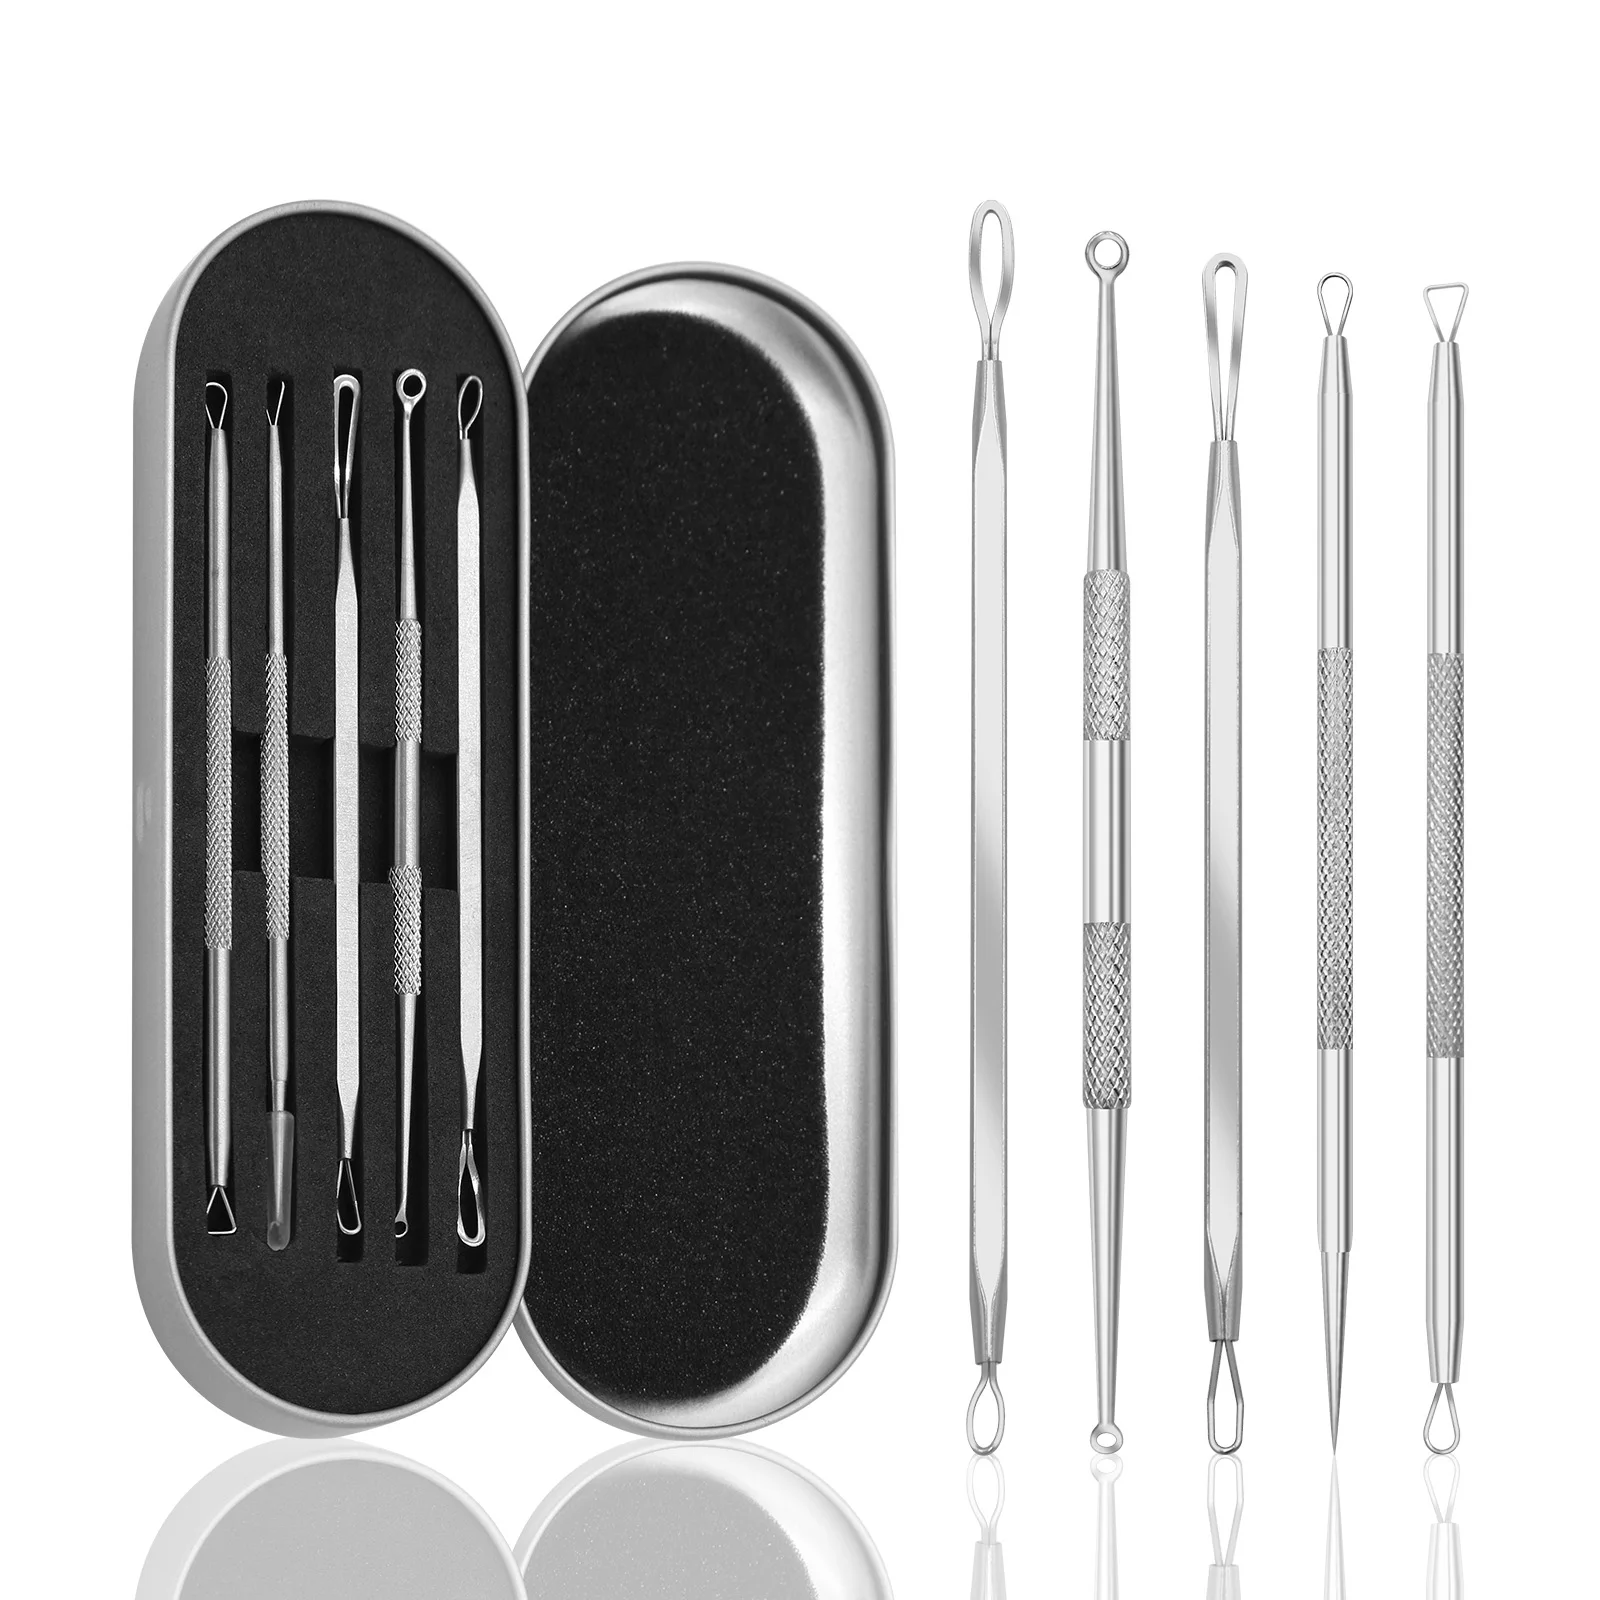 Blackhead Pimple Needles Remover Facial tools Kit Needles Acne Remover Deep Pore Clean Skin Extracto Care Stainless Steel Set